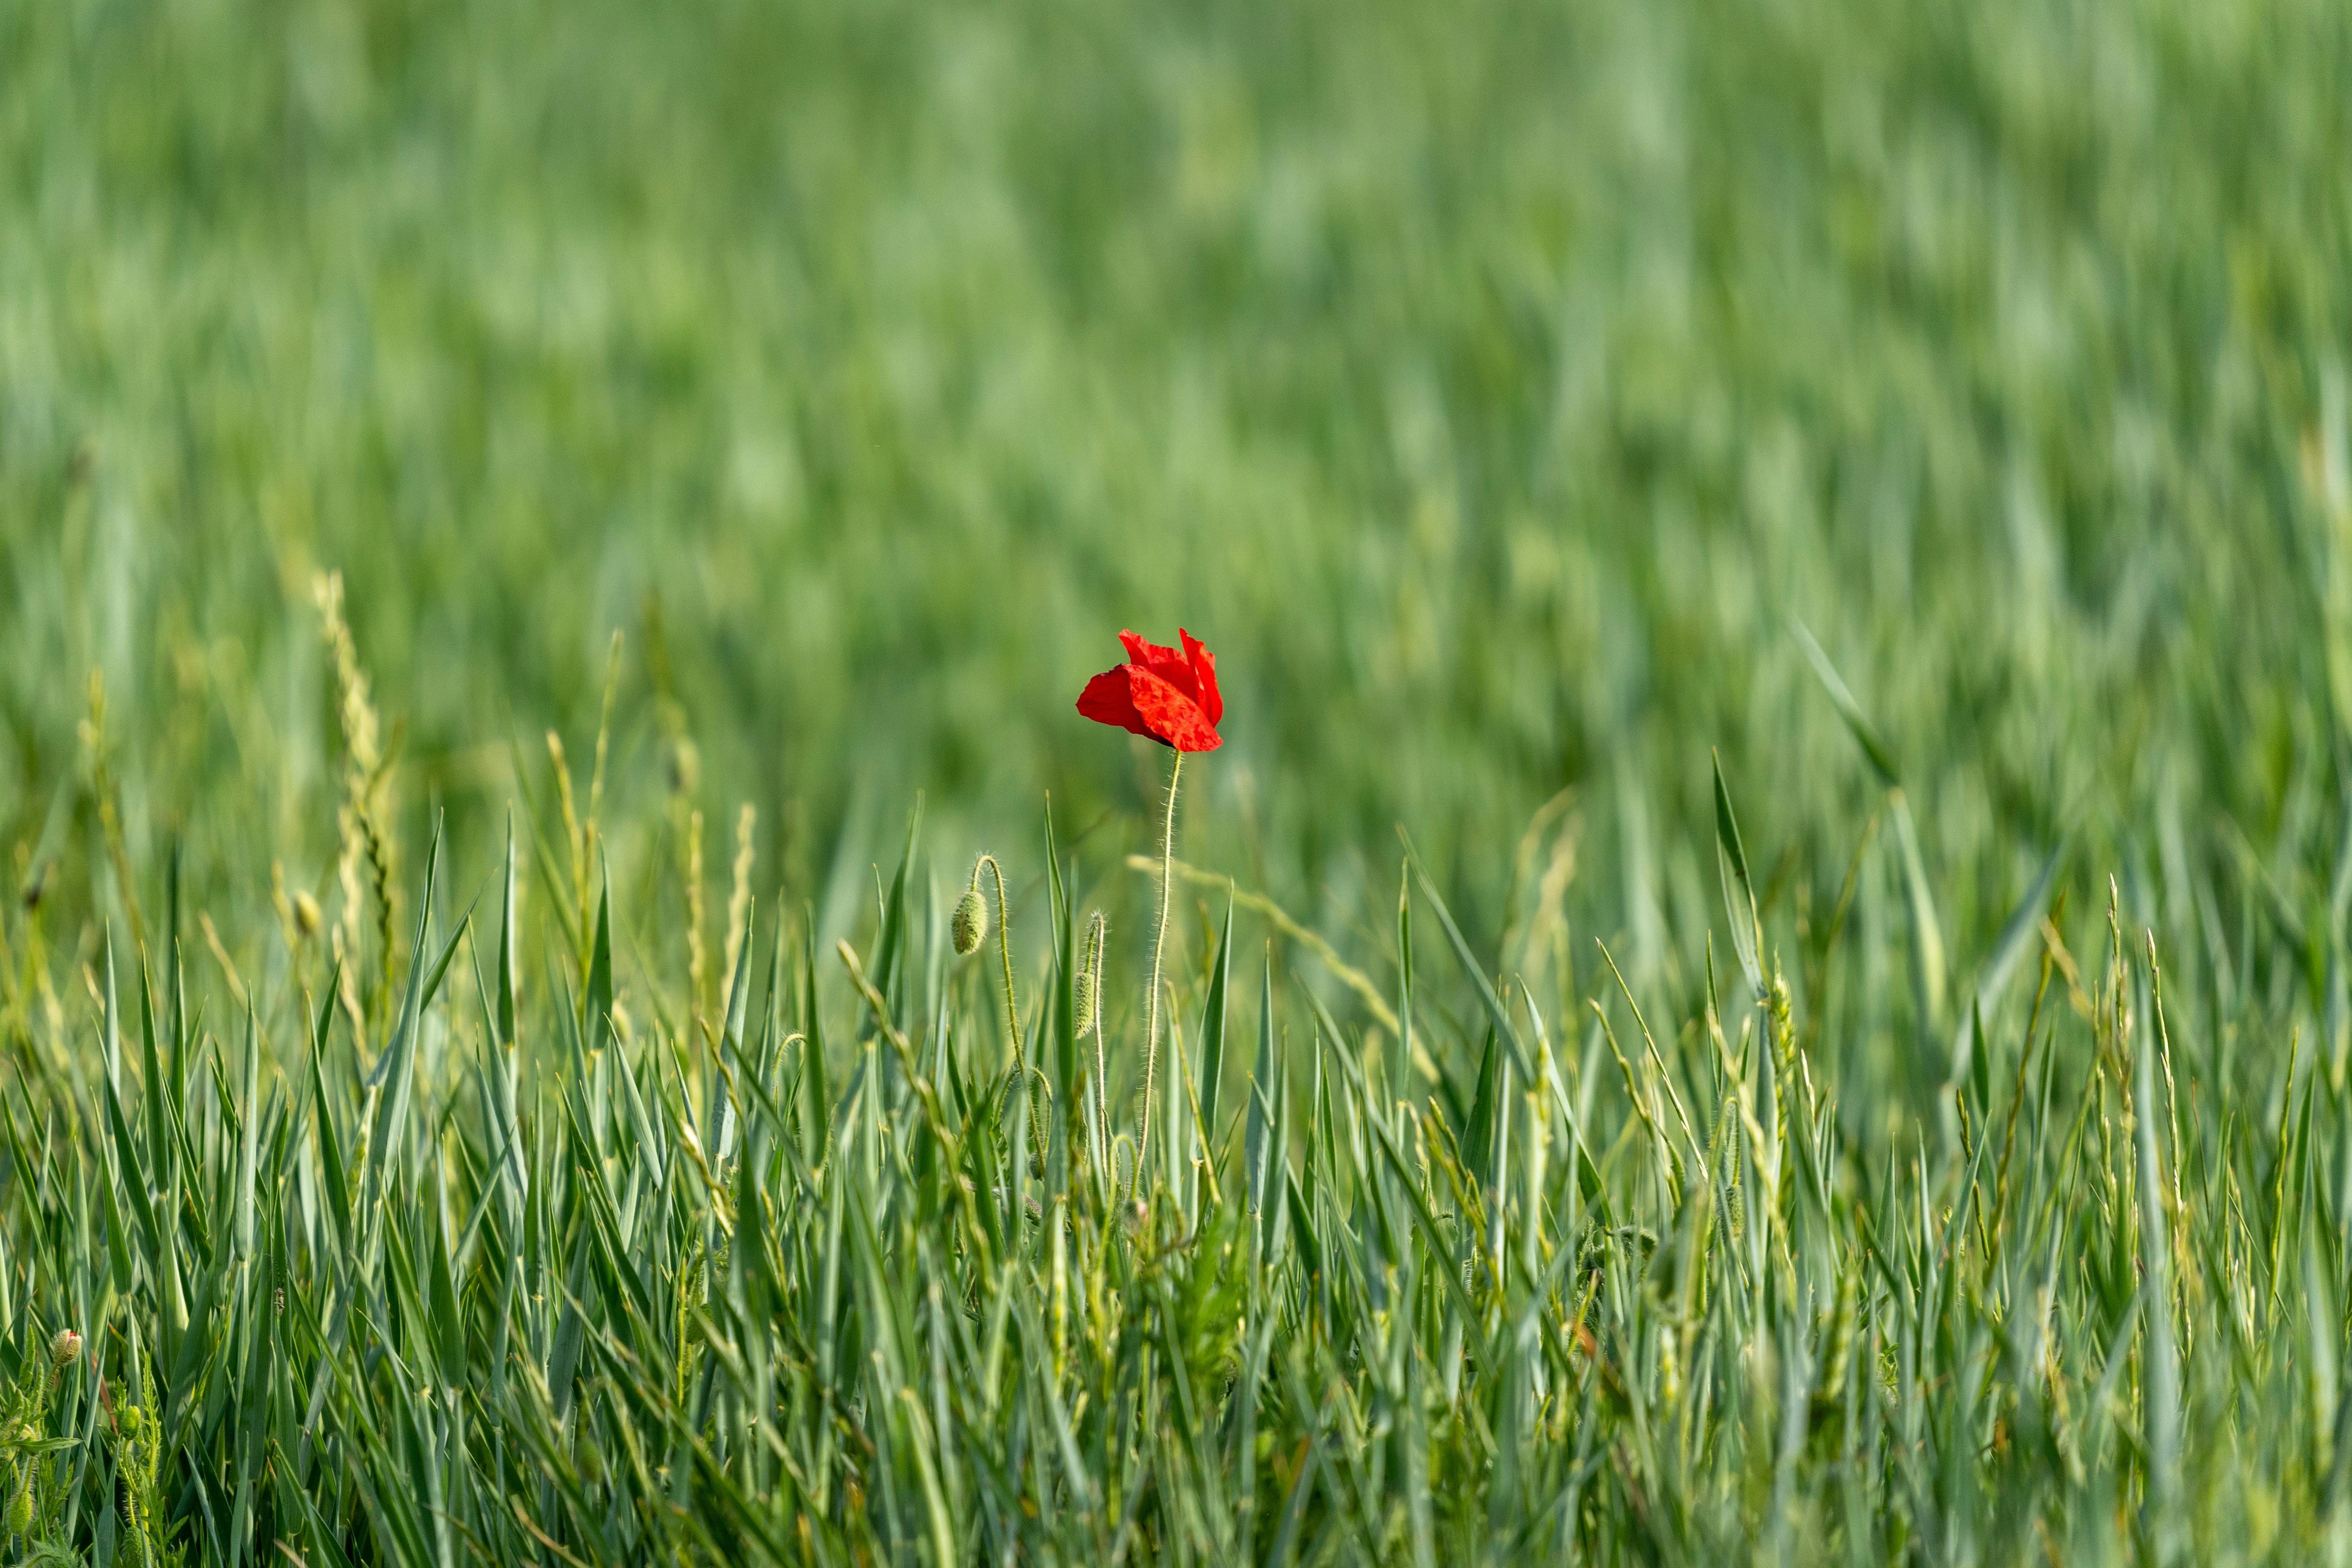 a lone red poppy in a field of green grass